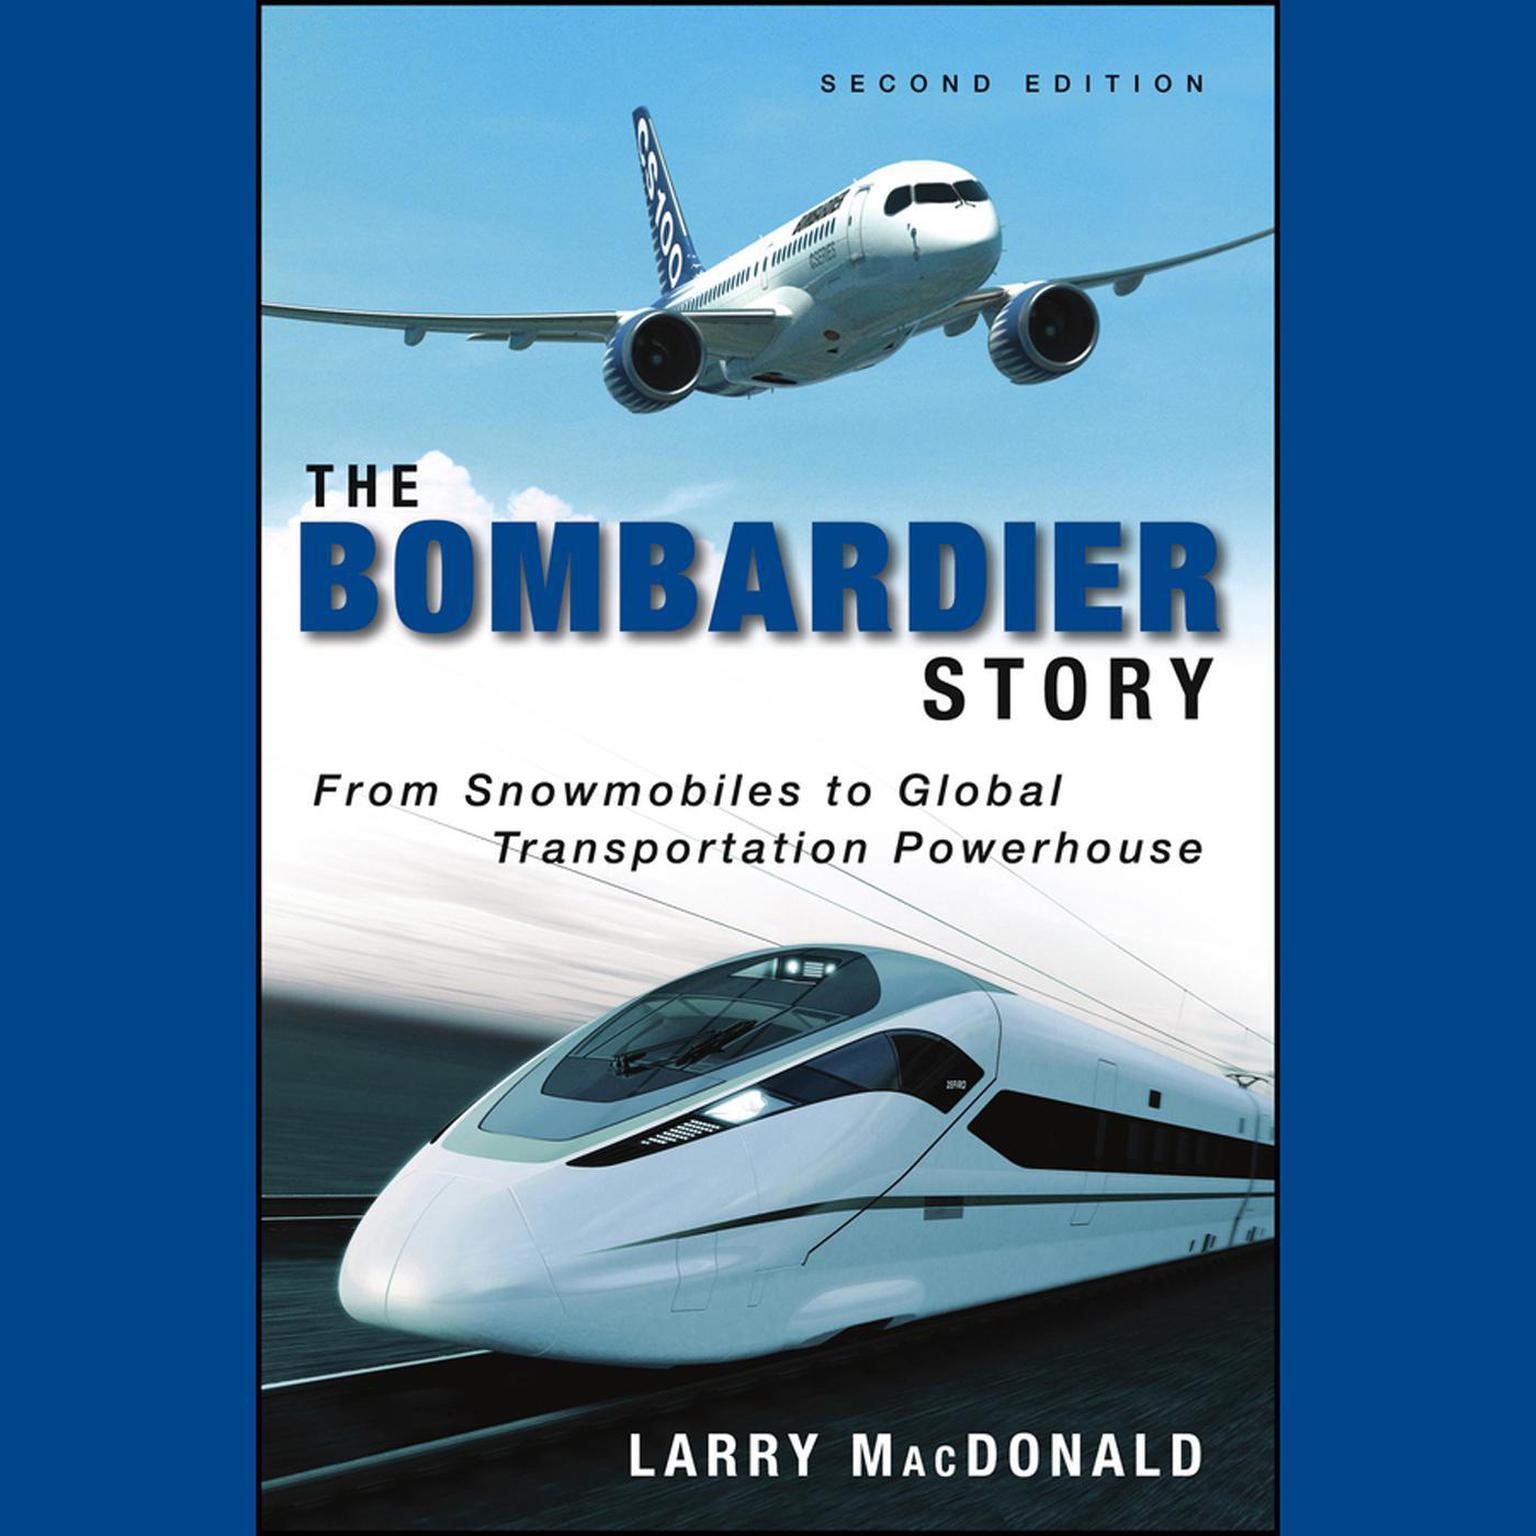 The Bombardier Story: From Snowmobiles to Global Transportation Powerhouse Audiobook, by Larry MacDonald